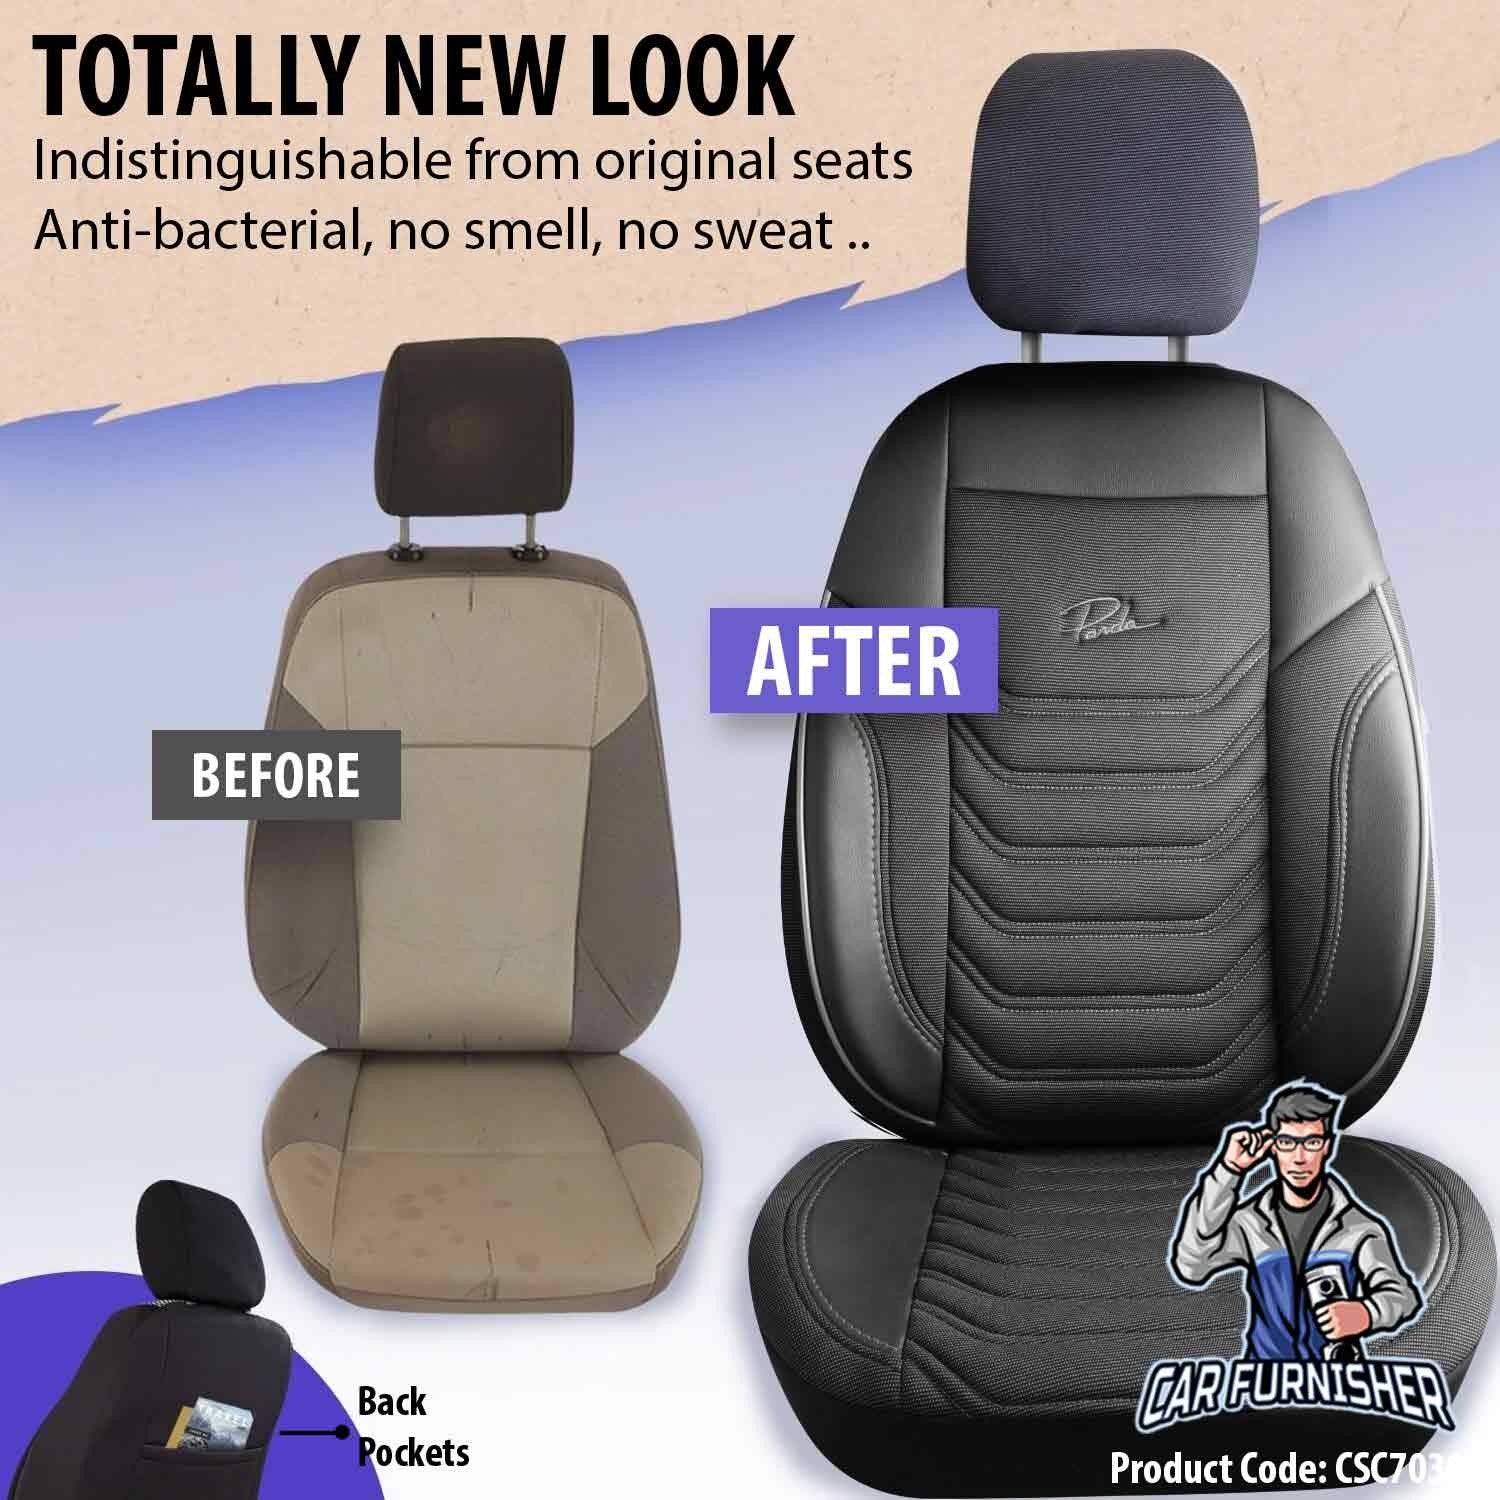 Luxury Car Seat Cover Set (3 Colors) | Florida Series Black Leather & Fabric